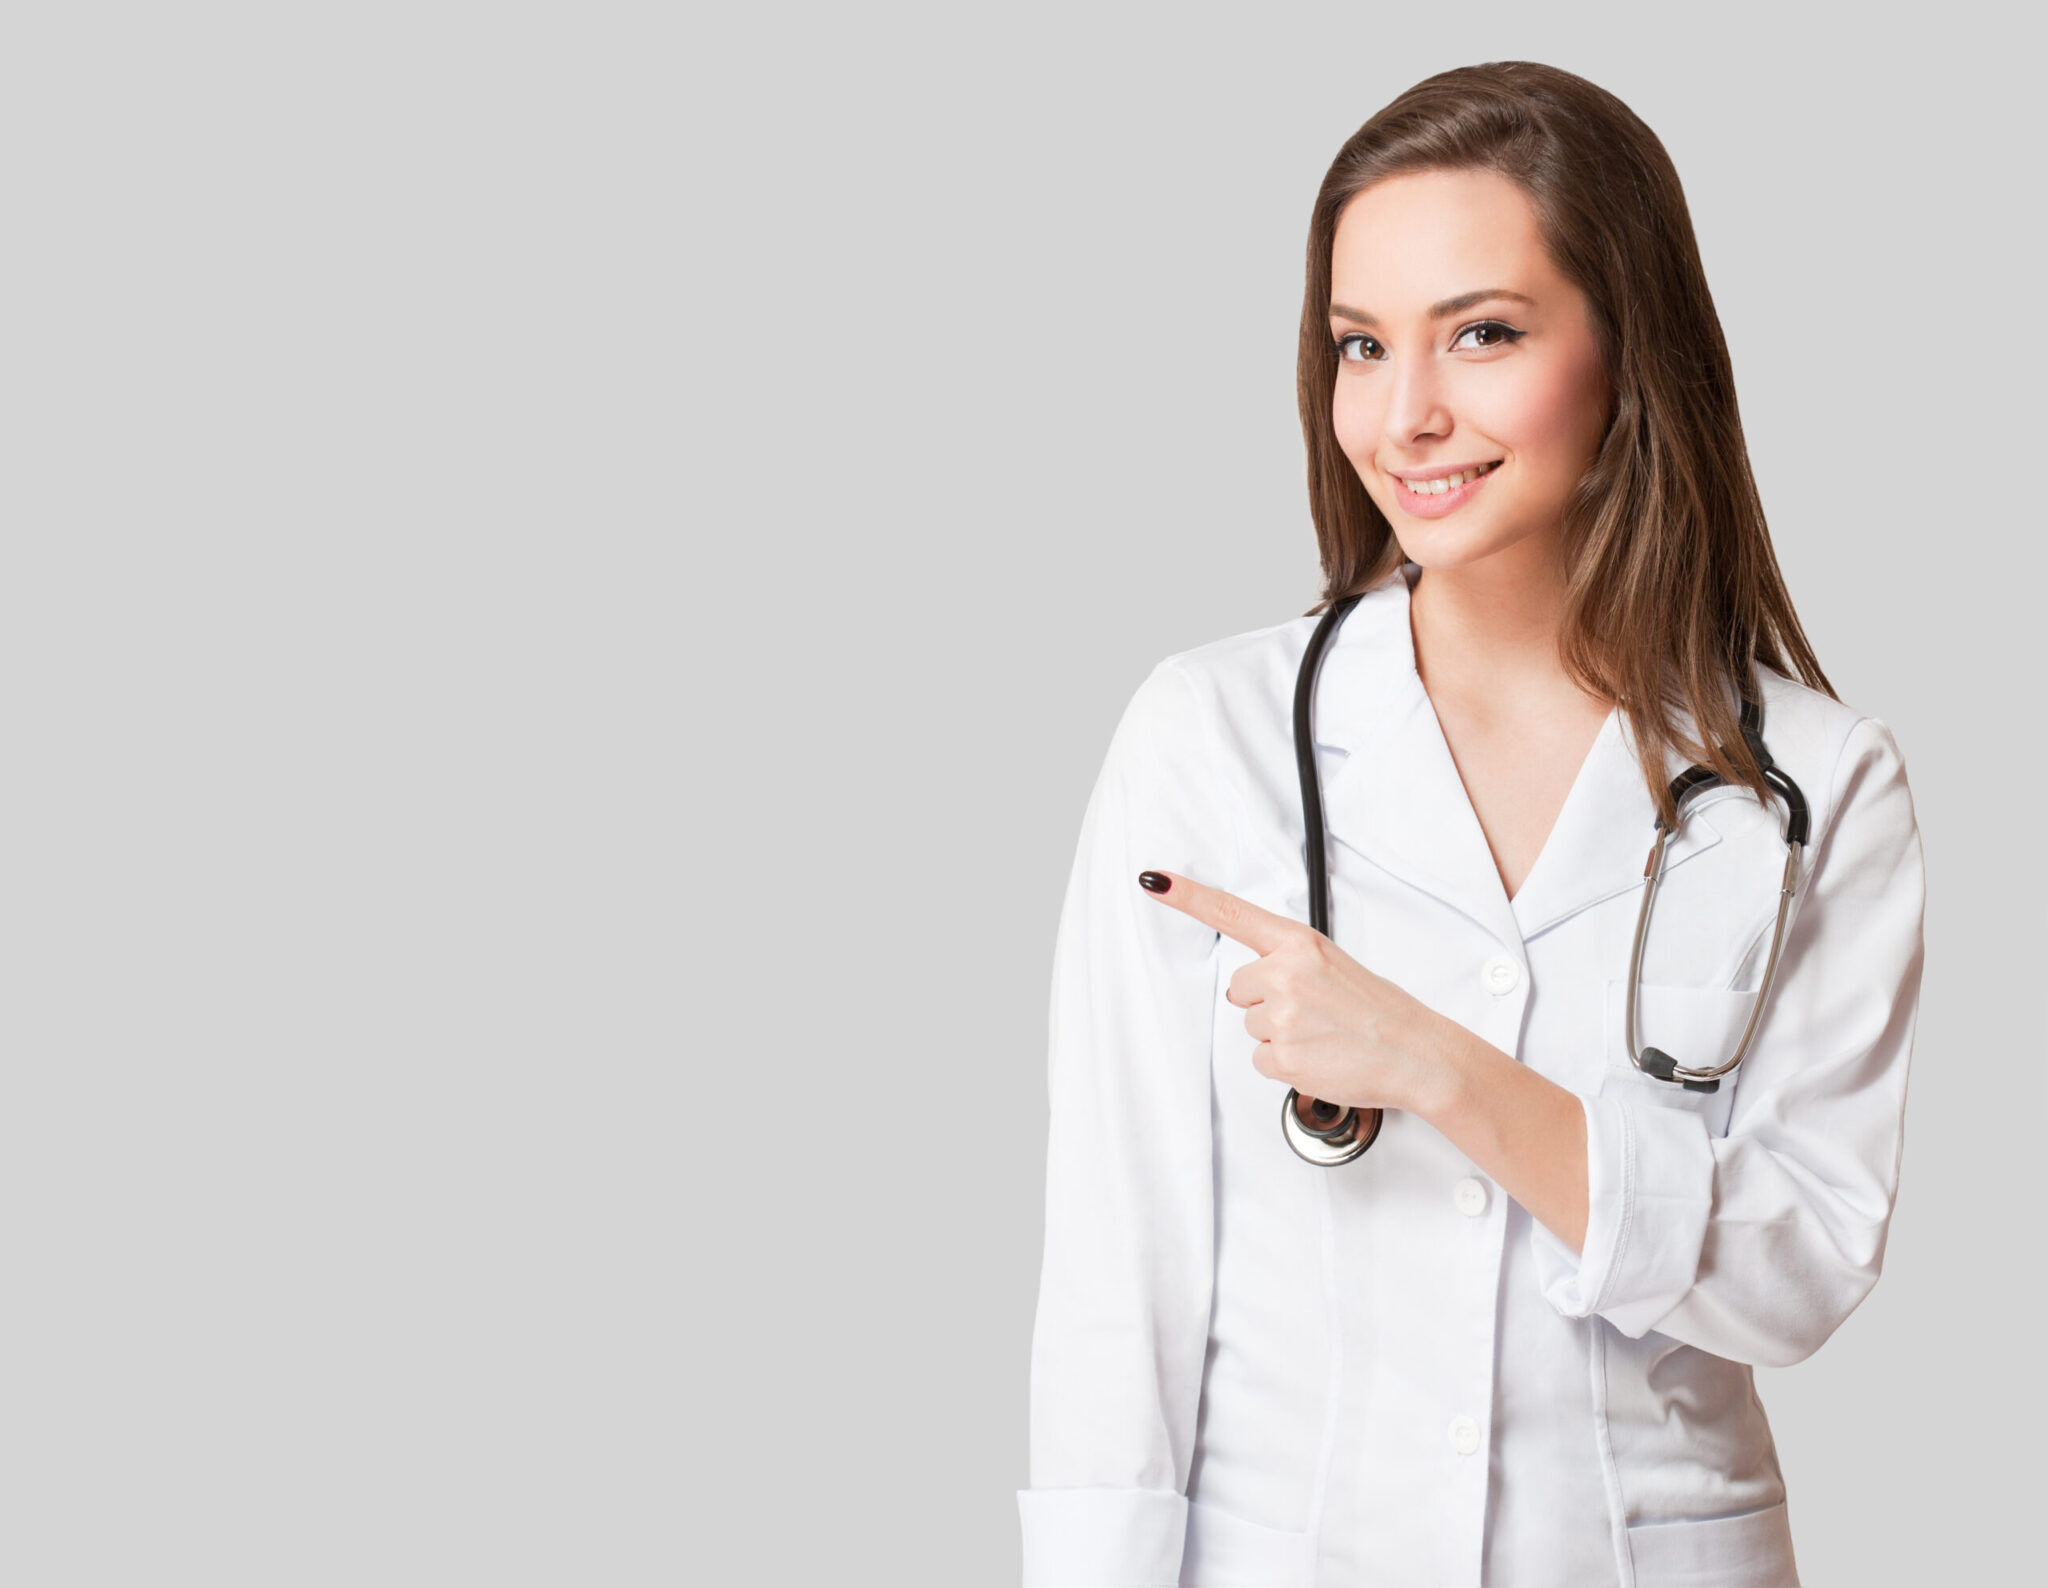 Portrait of a young female doctor in white coat.